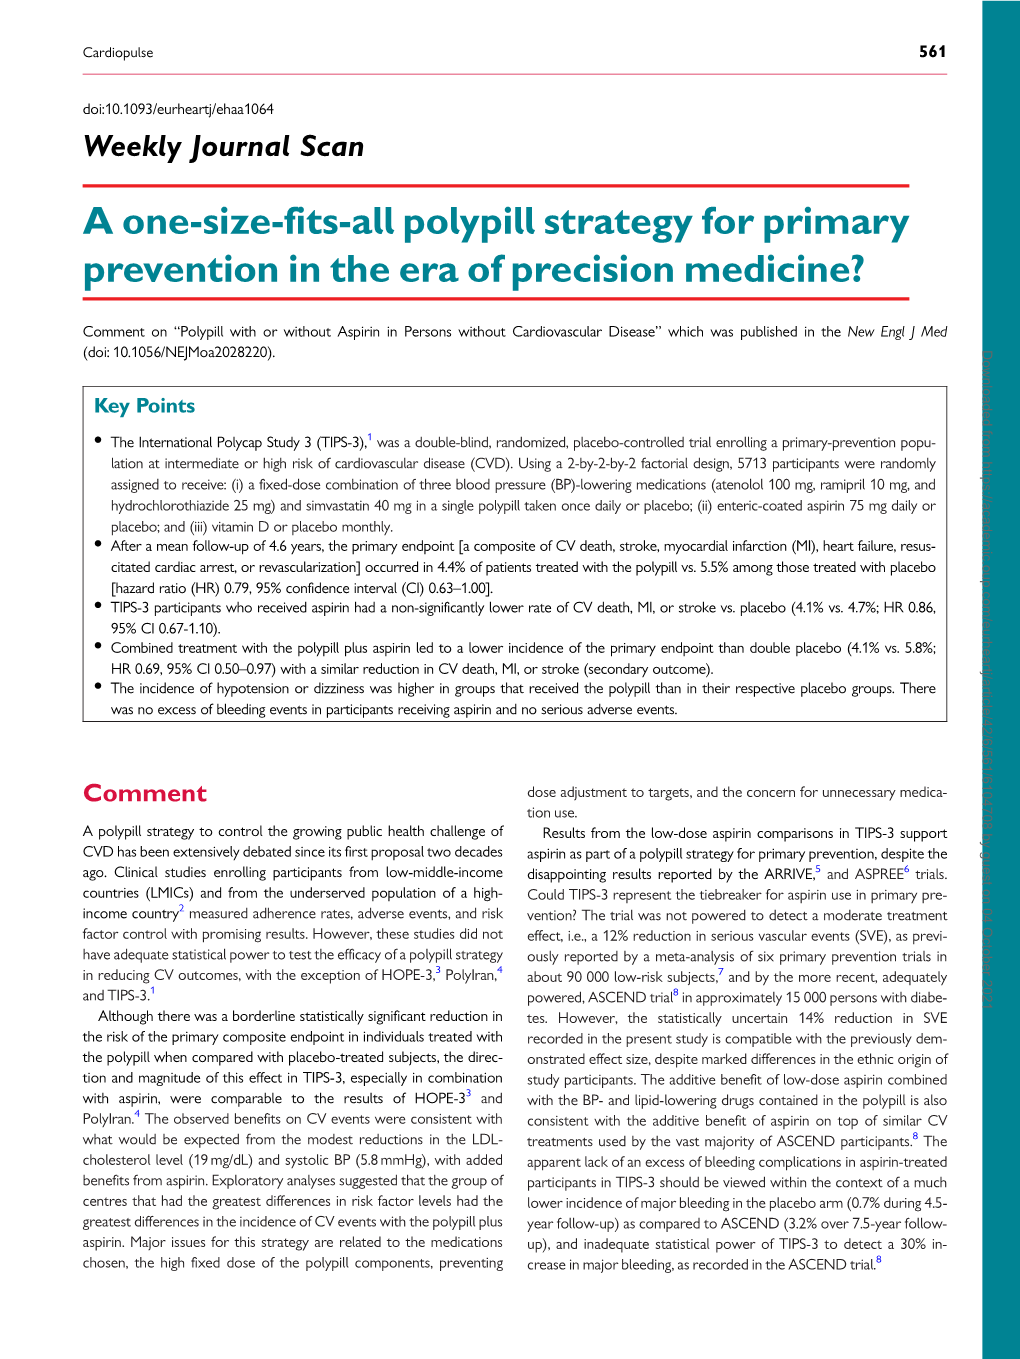 A One-Size-Fits-All Polypill Strategy for Primary Prevention in the Era of Precision Medicine?